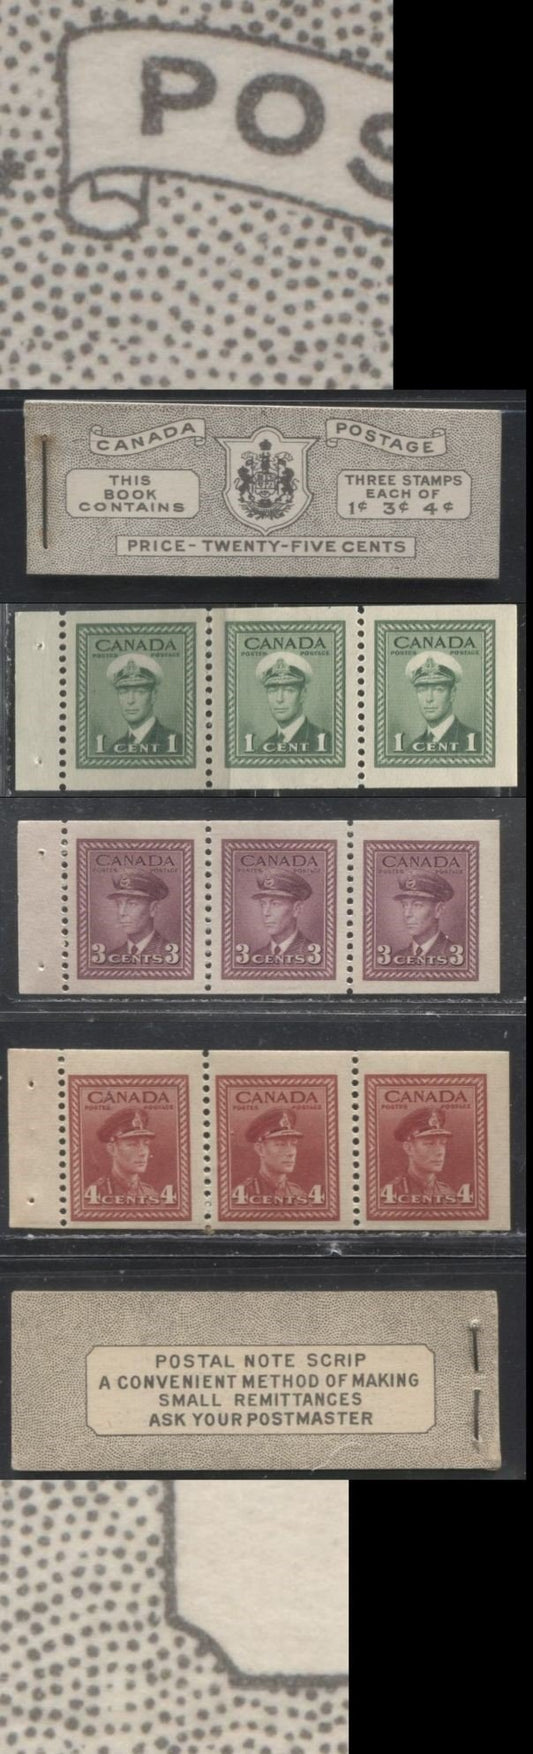 Lot 290 Canada #BK38a 1942-1949 War Issue Complete 25c, English Booklet Containing 1 Pane Each of 3 of 1c Green, 3c Rosy Plum and 4c Carmine Red, Harris Front Cover Type IVc , Back Cover Haiii, 7c & 6c Rate Page